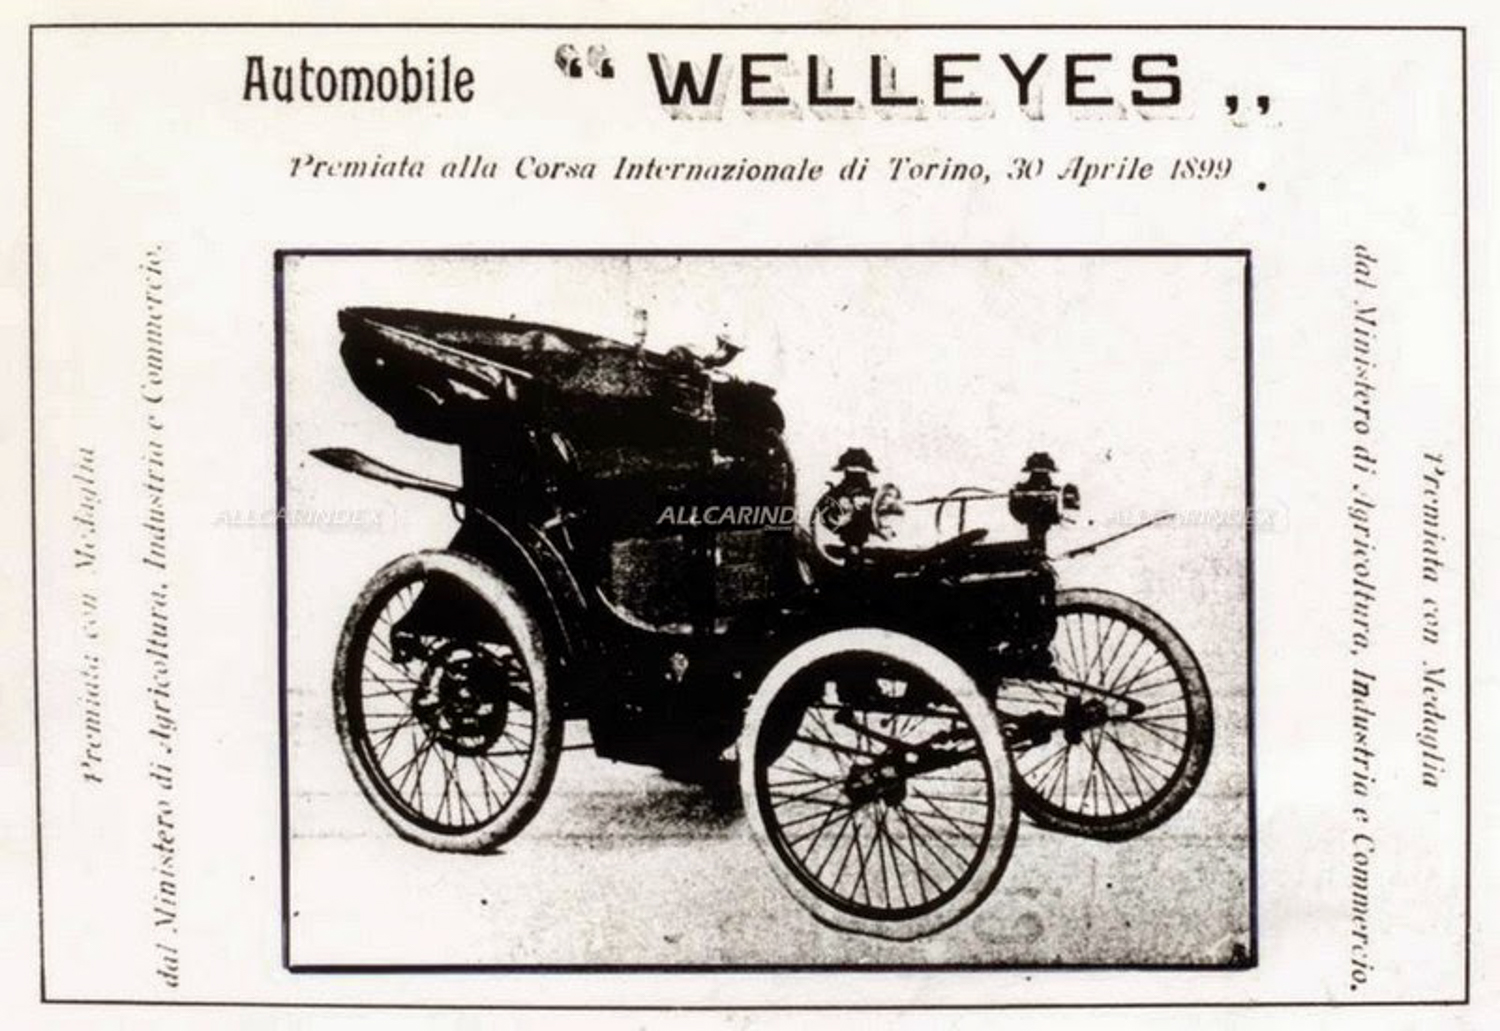 Lancia was drawn to Ceirano's new auto, the Welleyes 